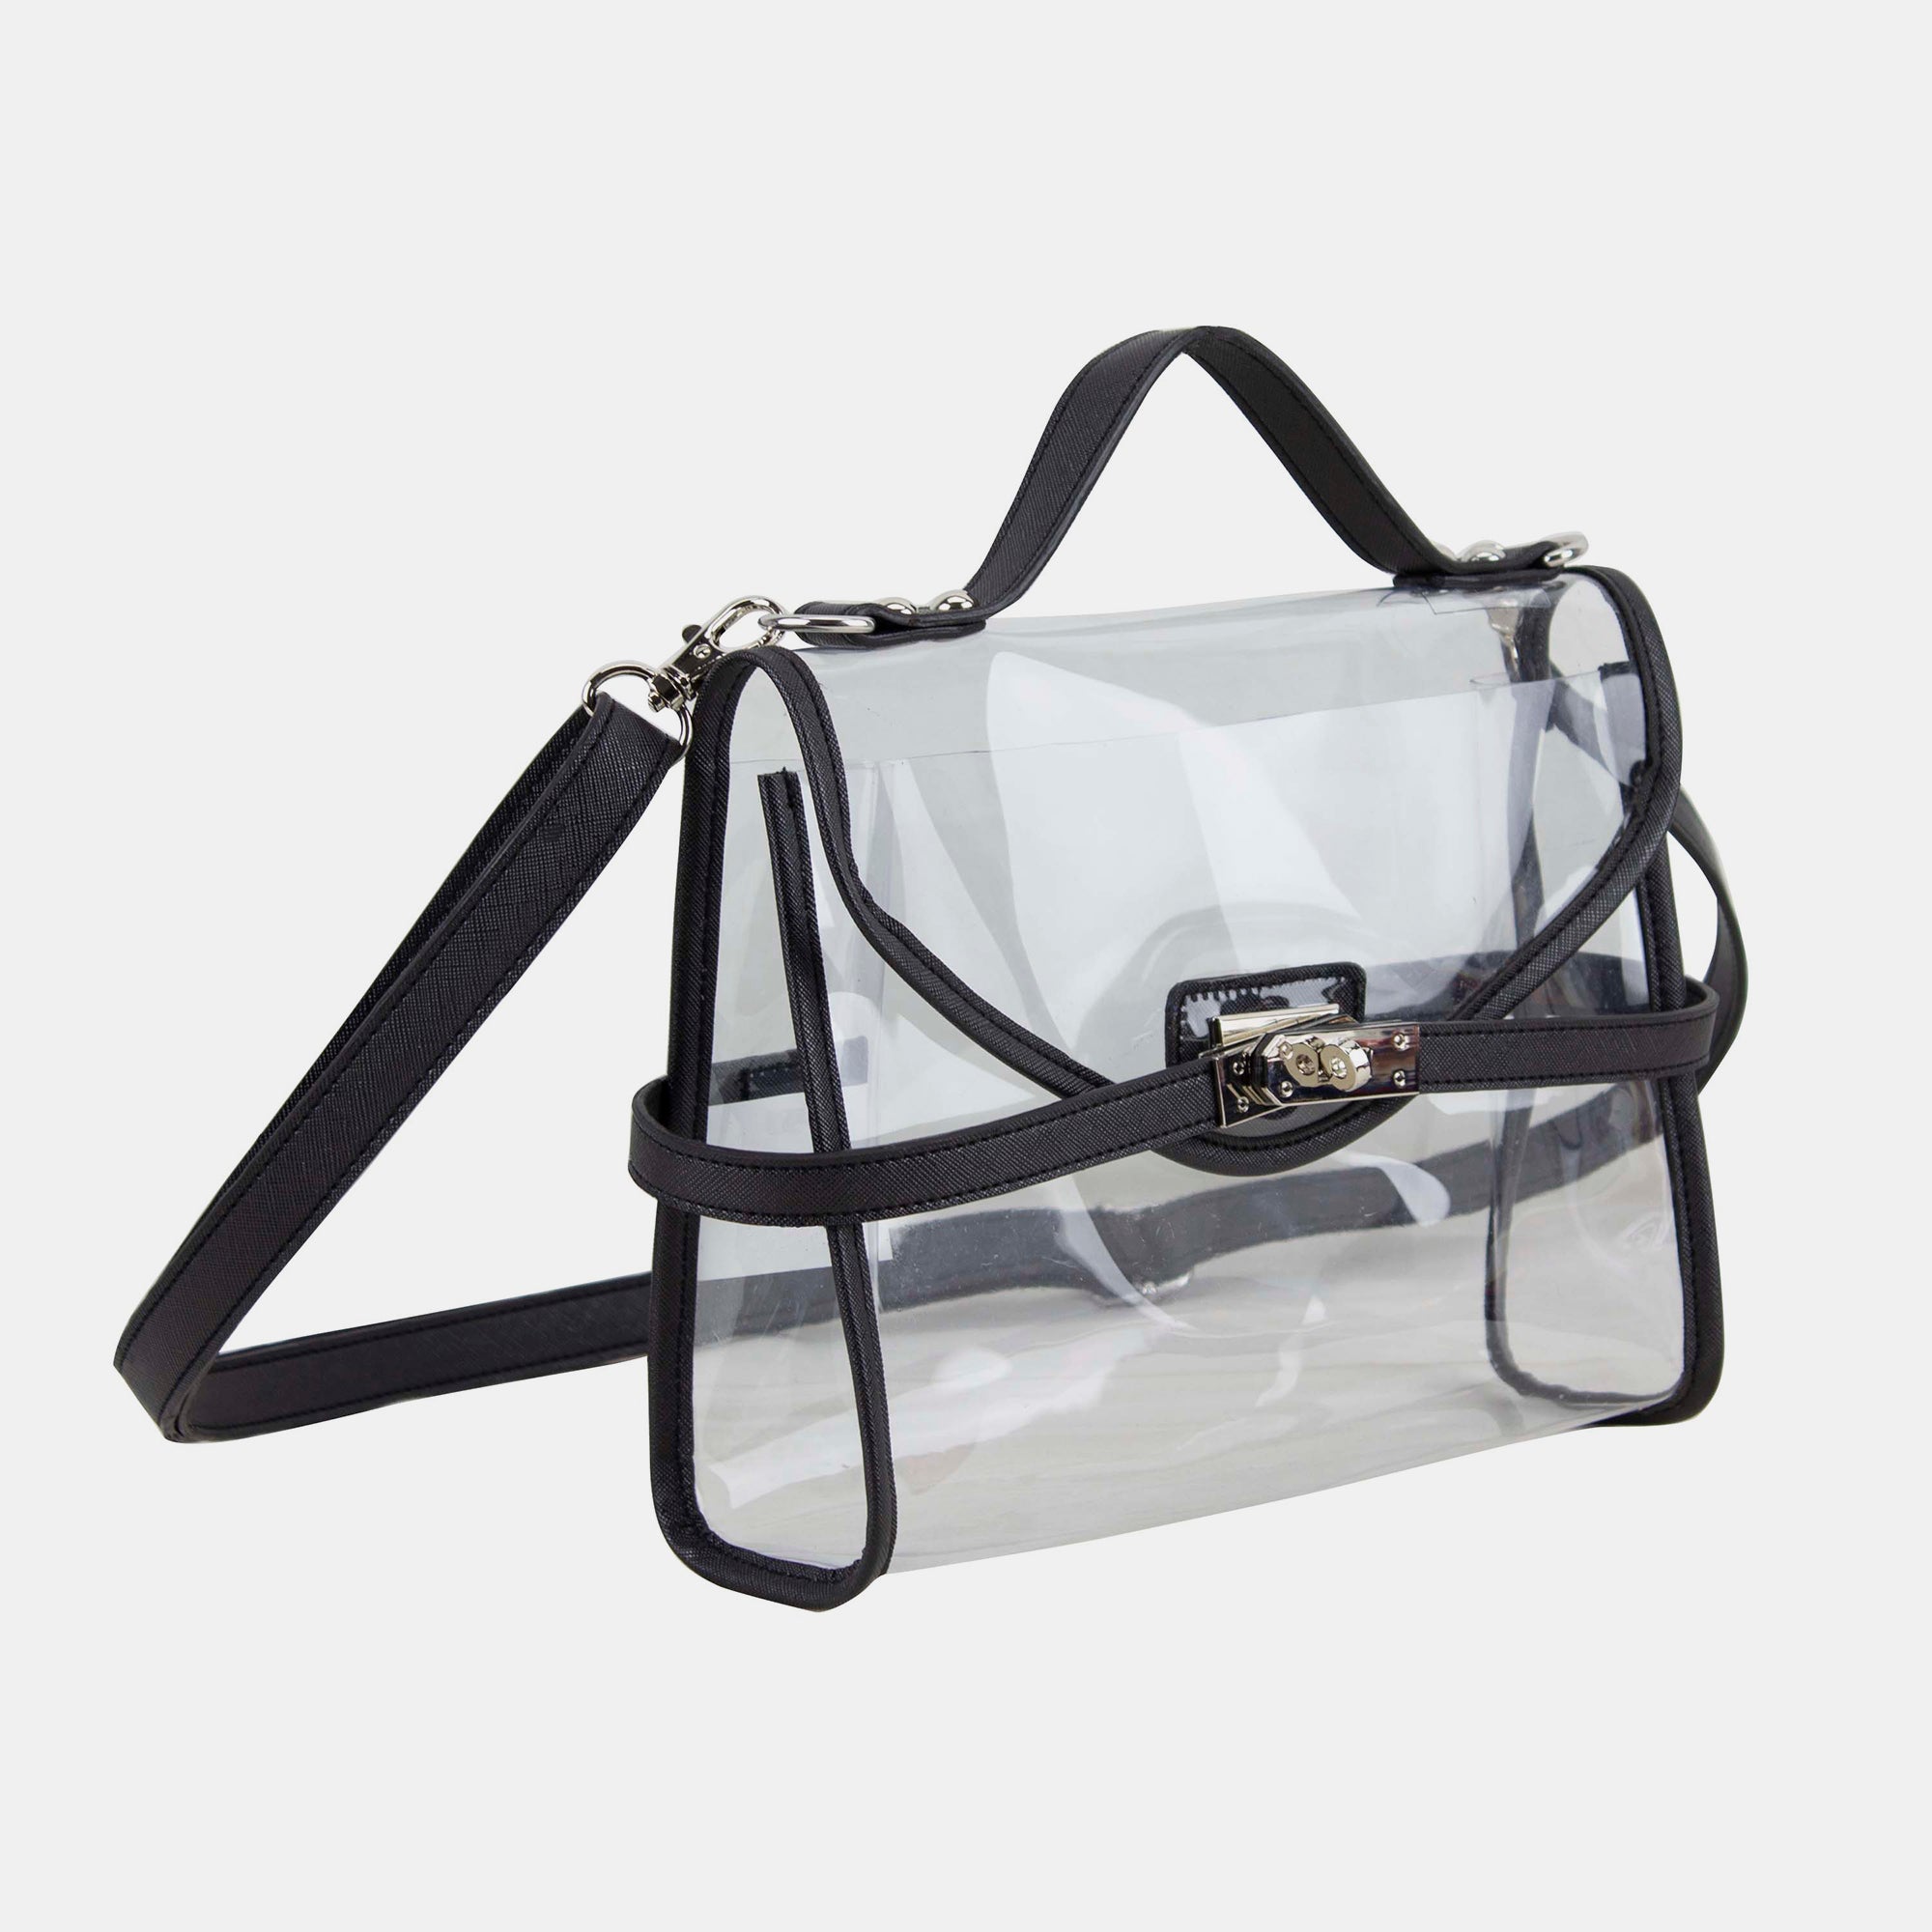 BIJOUX LIMITED CLEAR HANDBAG COLLECTION – Fuel USA